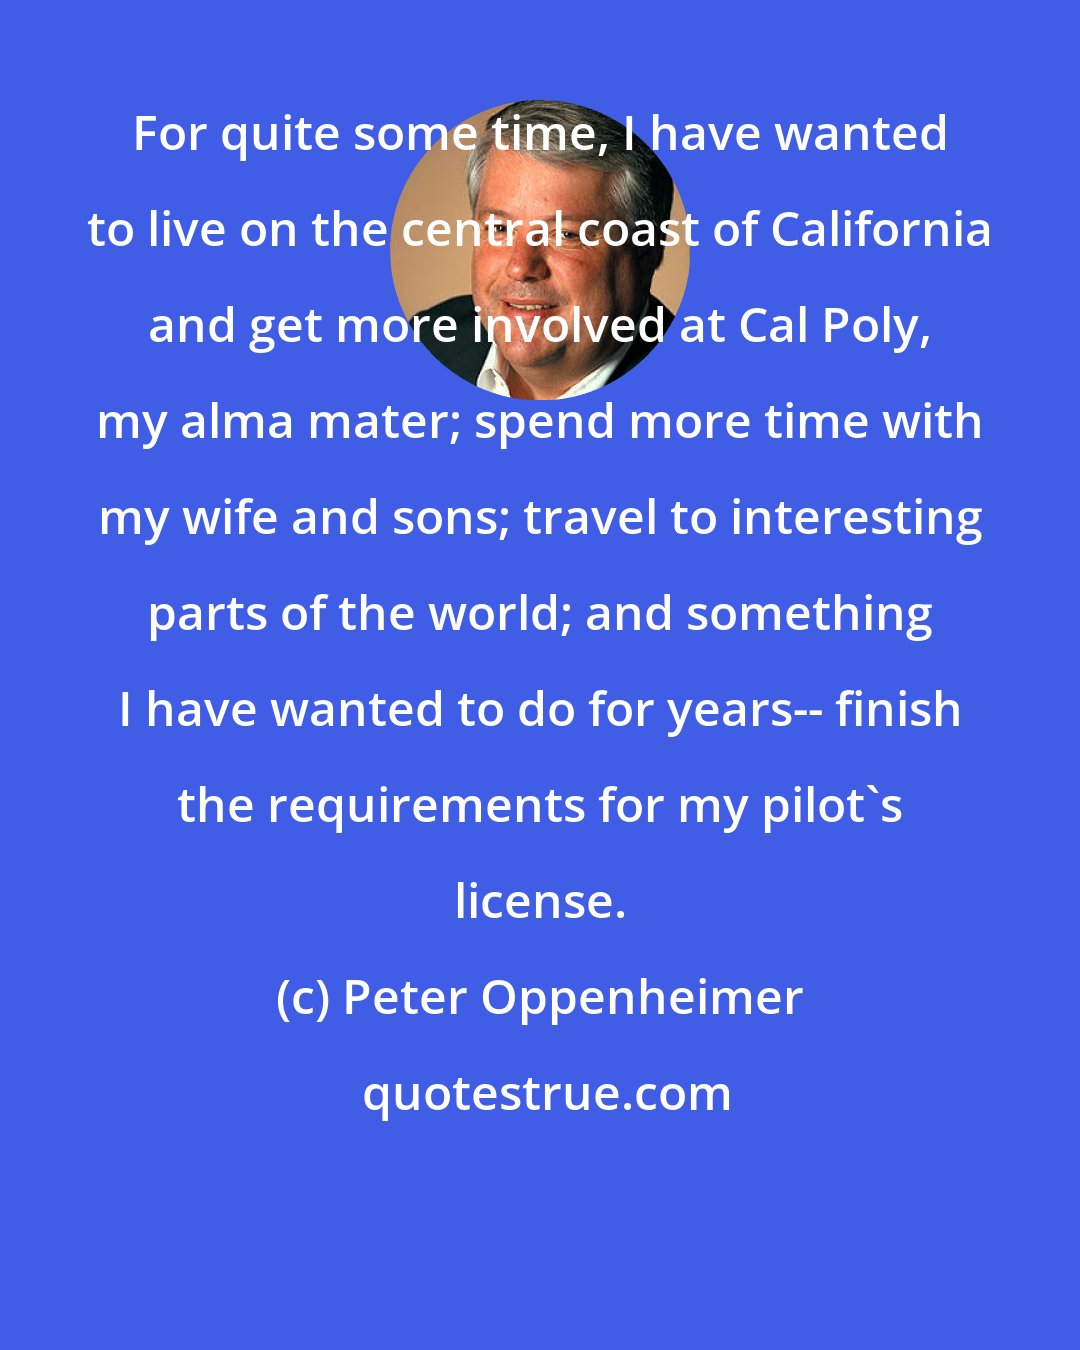 Peter Oppenheimer: For quite some time, I have wanted to live on the central coast of California and get more involved at Cal Poly, my alma mater; spend more time with my wife and sons; travel to interesting parts of the world; and something I have wanted to do for years-- finish the requirements for my pilot's license.